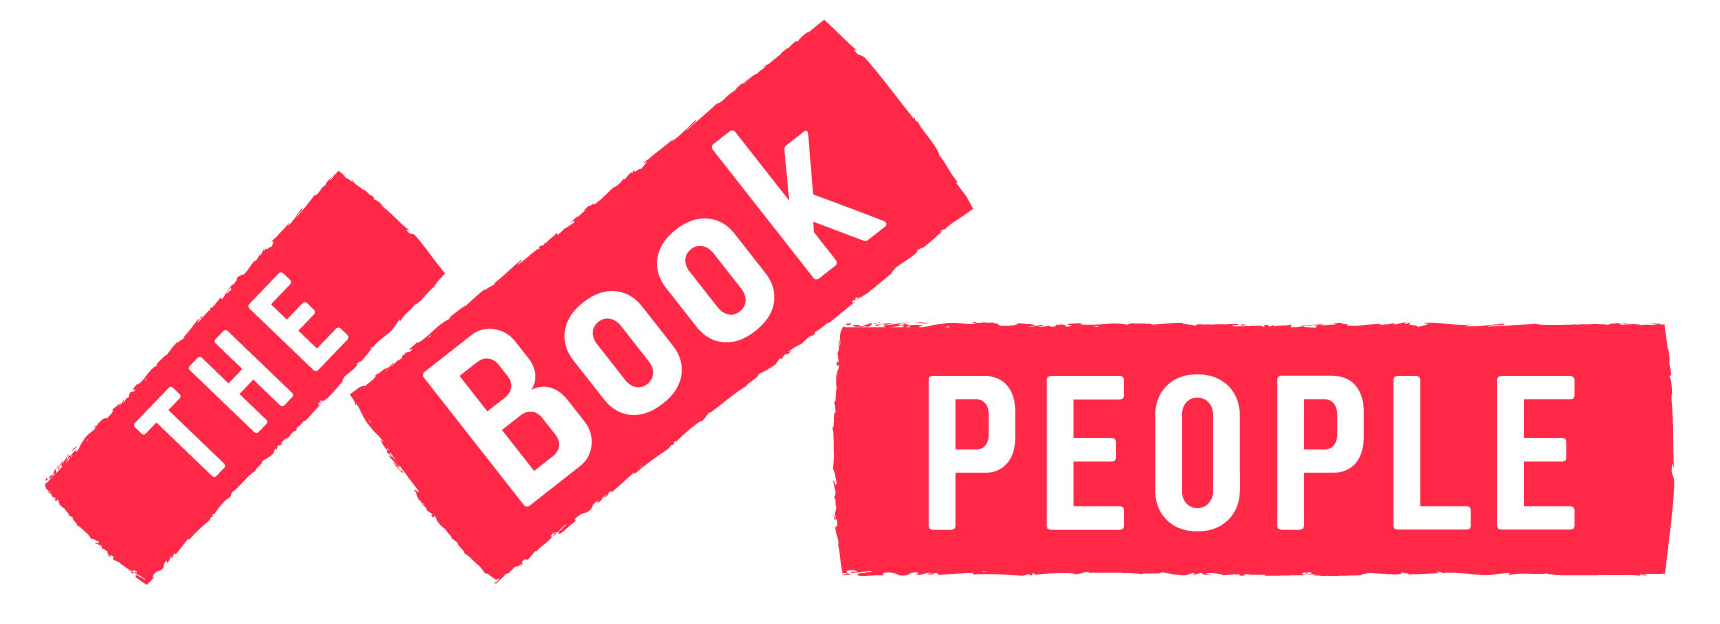 New Logo and Identity for The Book People by The Clearing